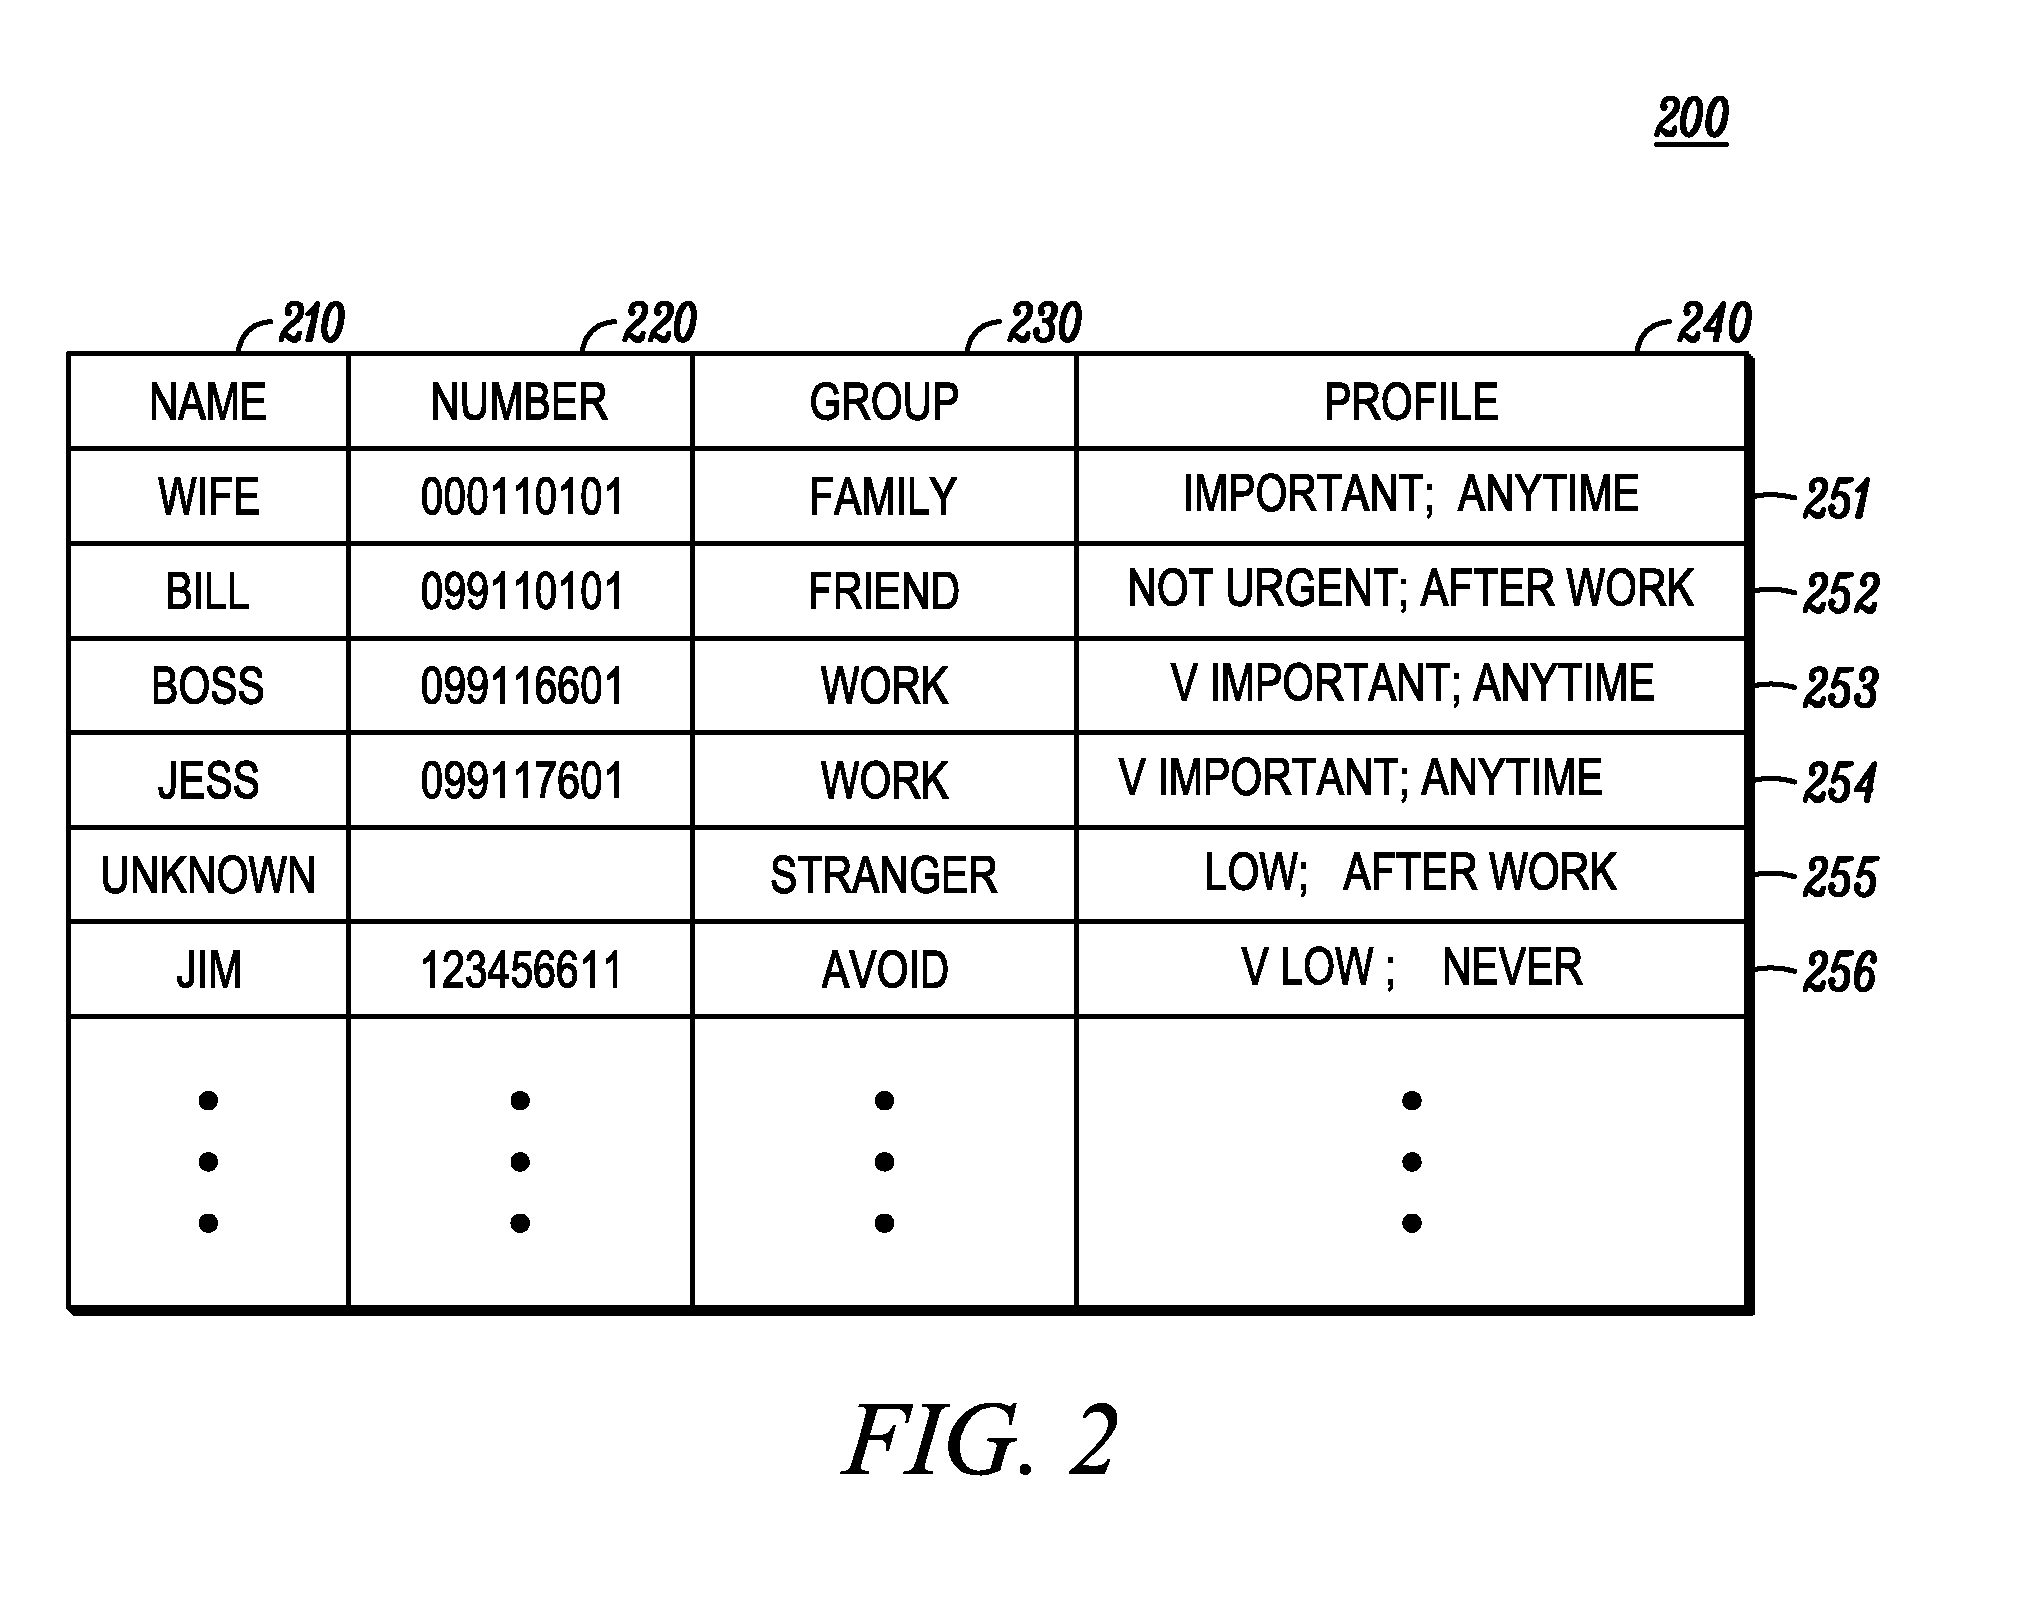 Communications Device and Method for Selecting a Missed Call Reminder Alert